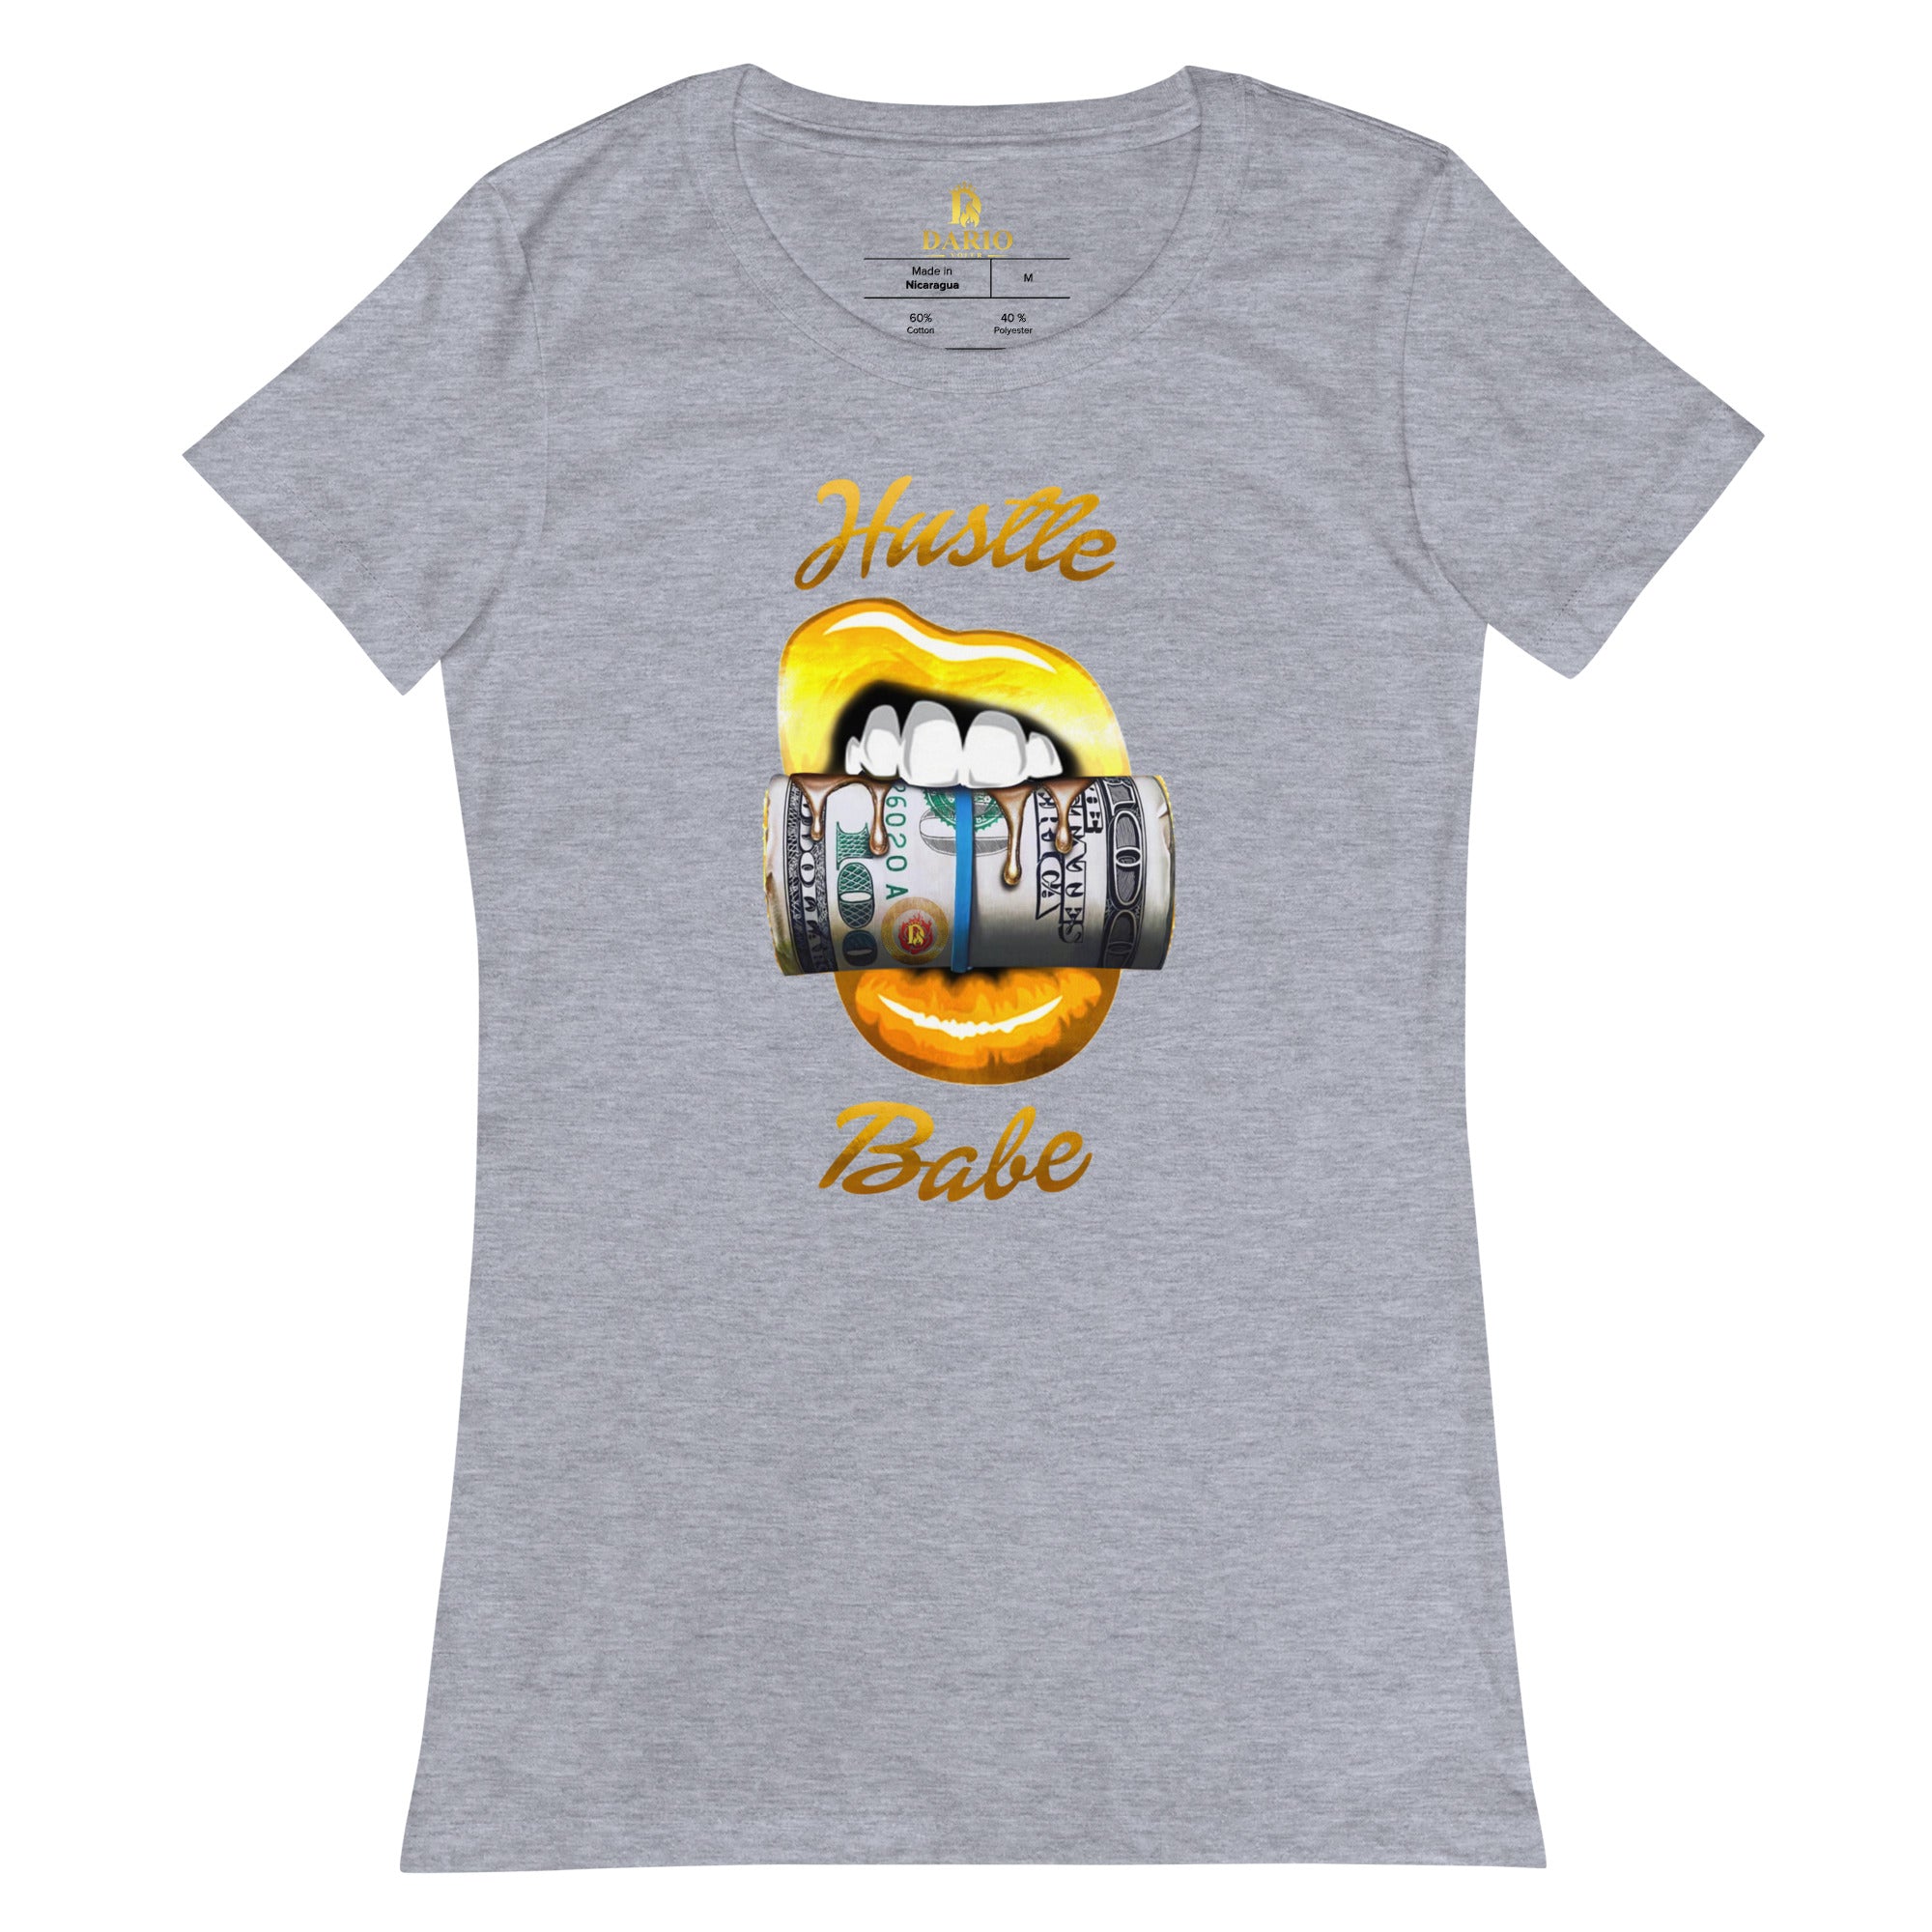 Women’s fitted Hustle Babe Gold Tee